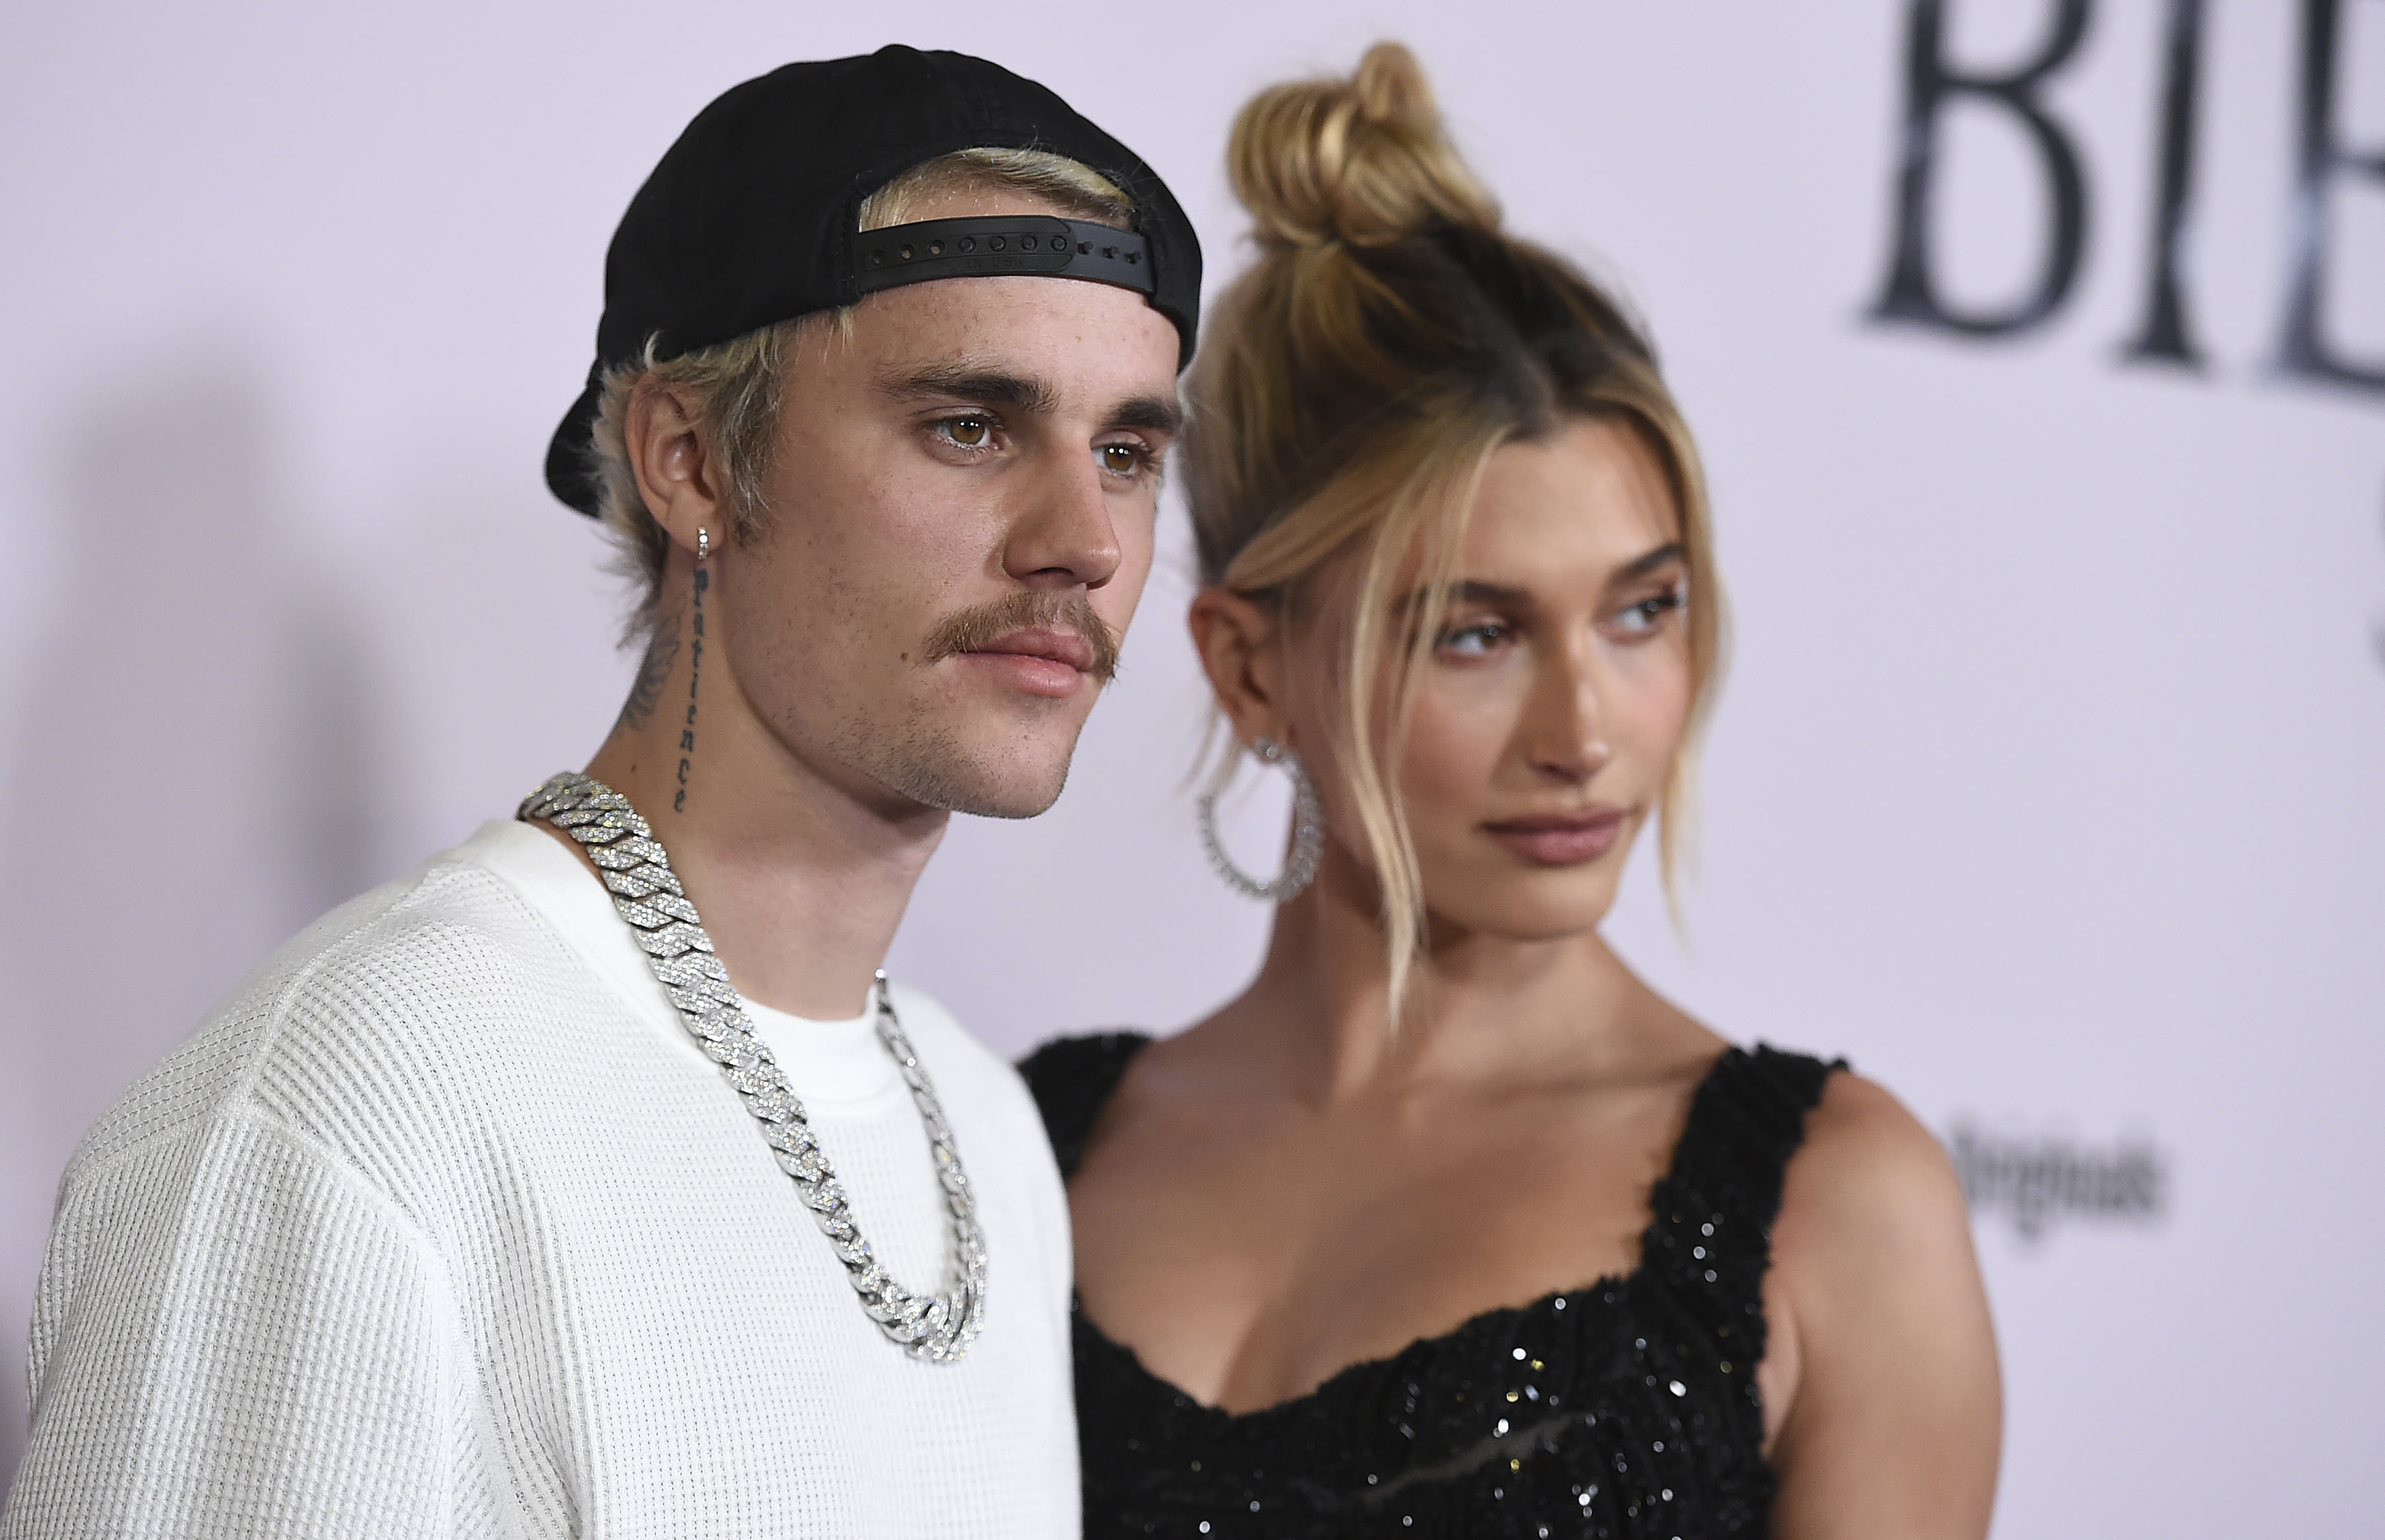 Sorry, not twins: Justin Bieber's mom clarifies, there's only one baby on the way